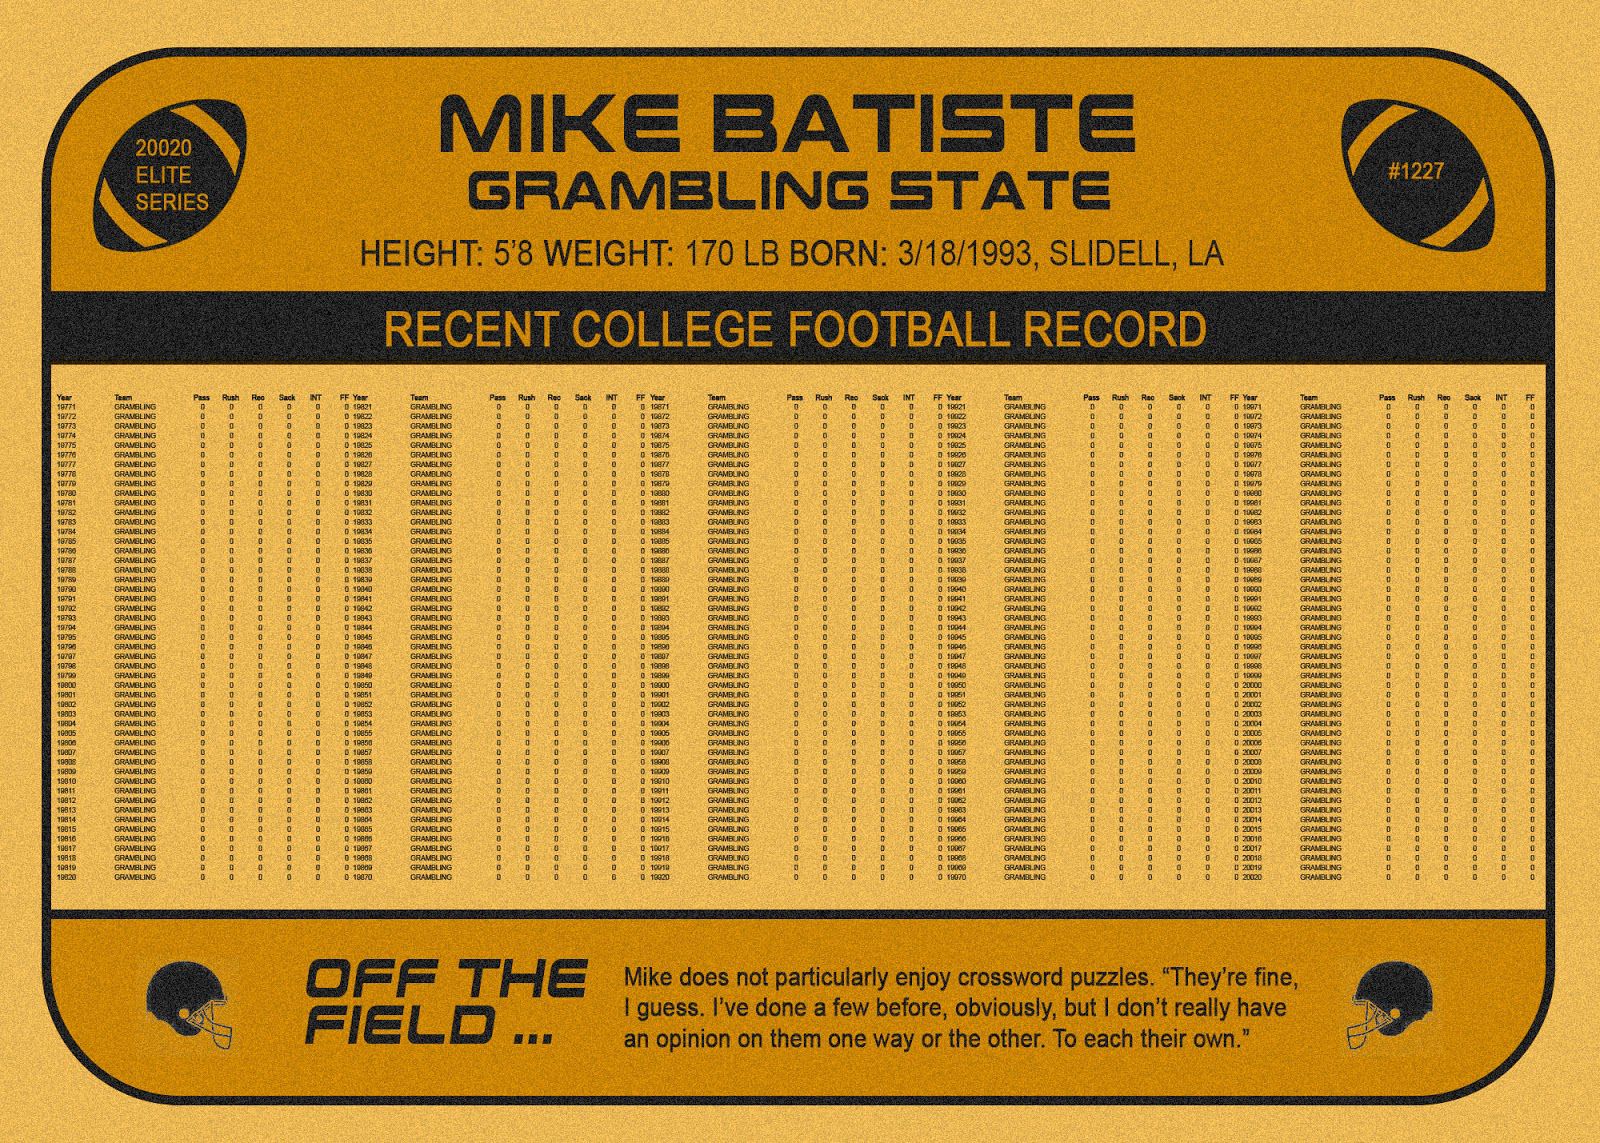 Mike Batiste’s football card, which mentions that he does not particularly like crossword puzzles.